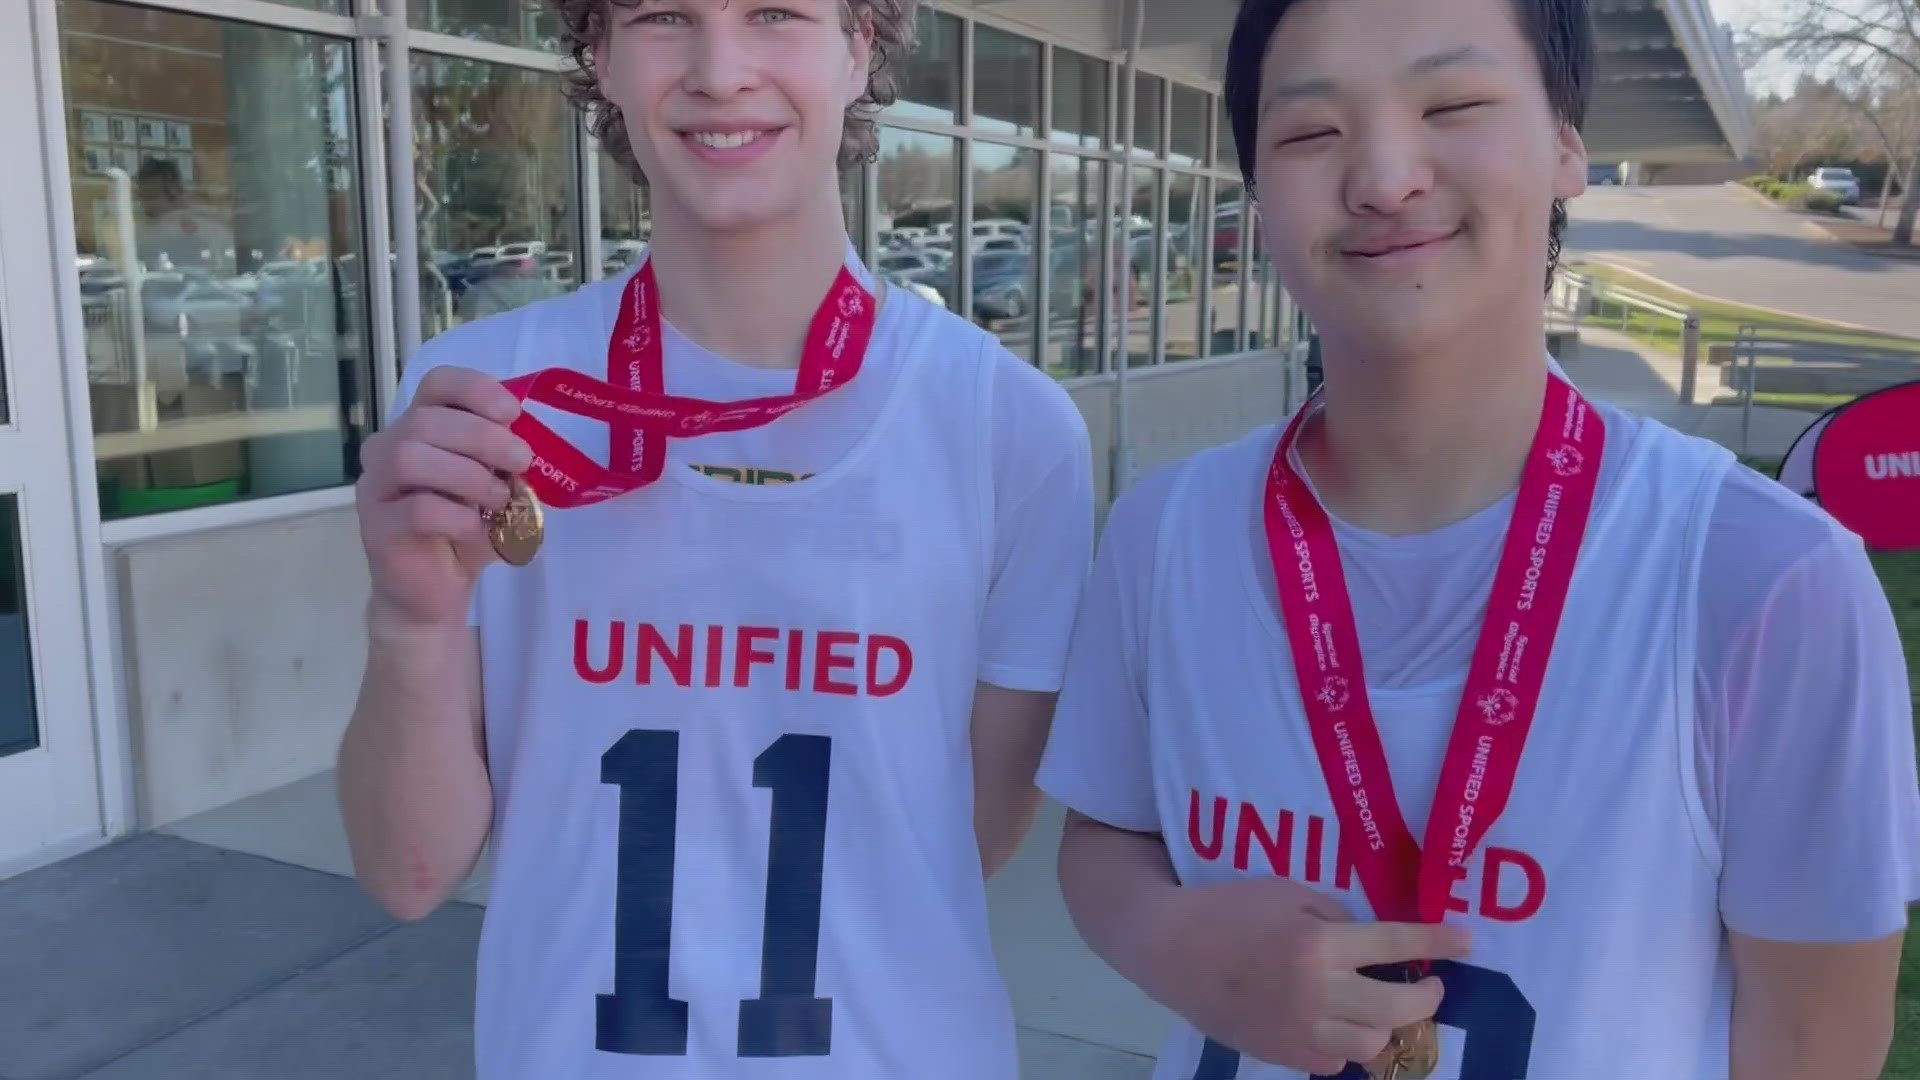 Unified Sports joins people with and without intellectual disabilities on the same team to promote social inclusion through sports.